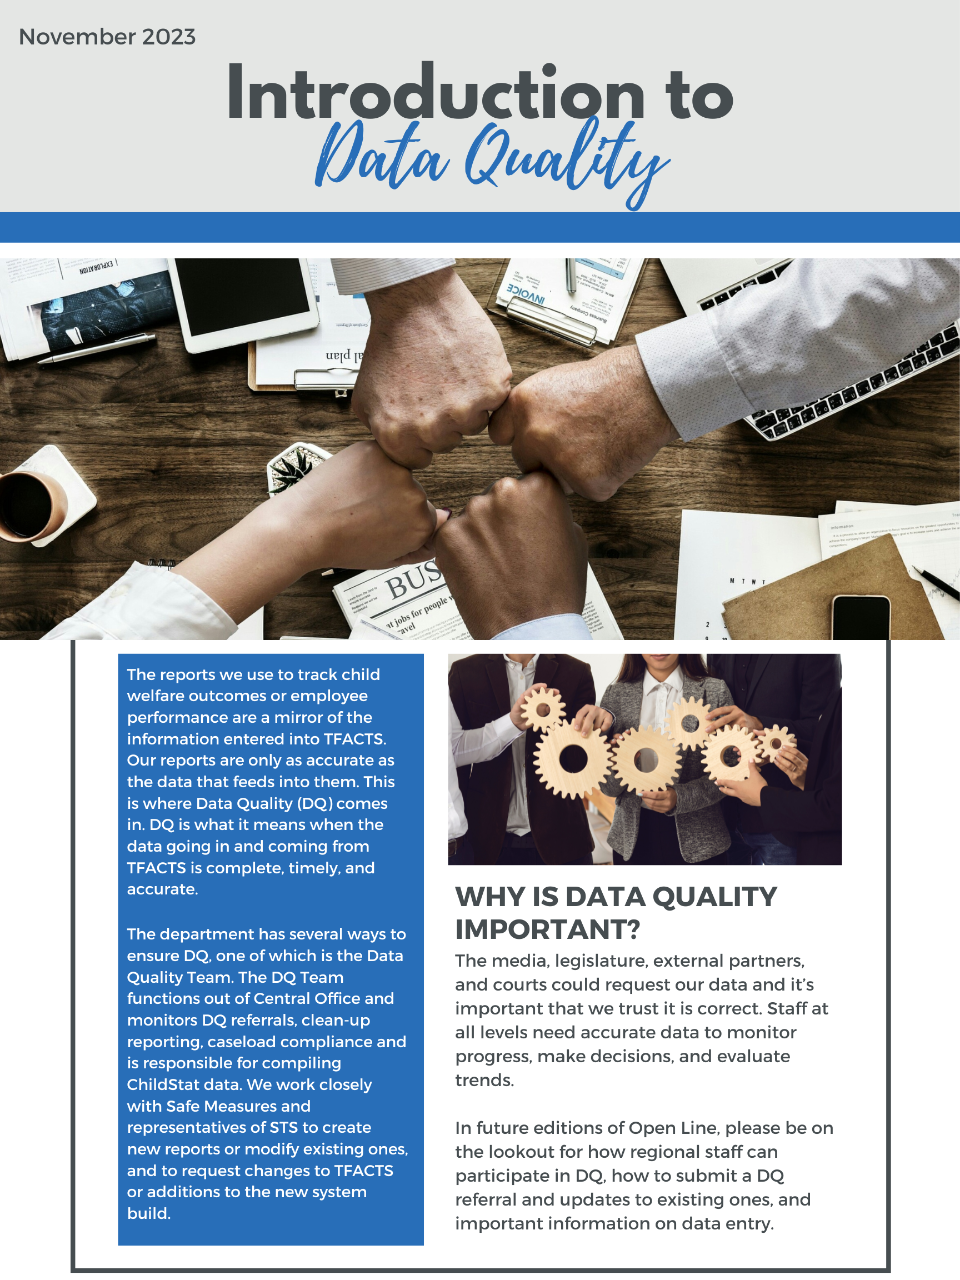 Introduction to Data Quality